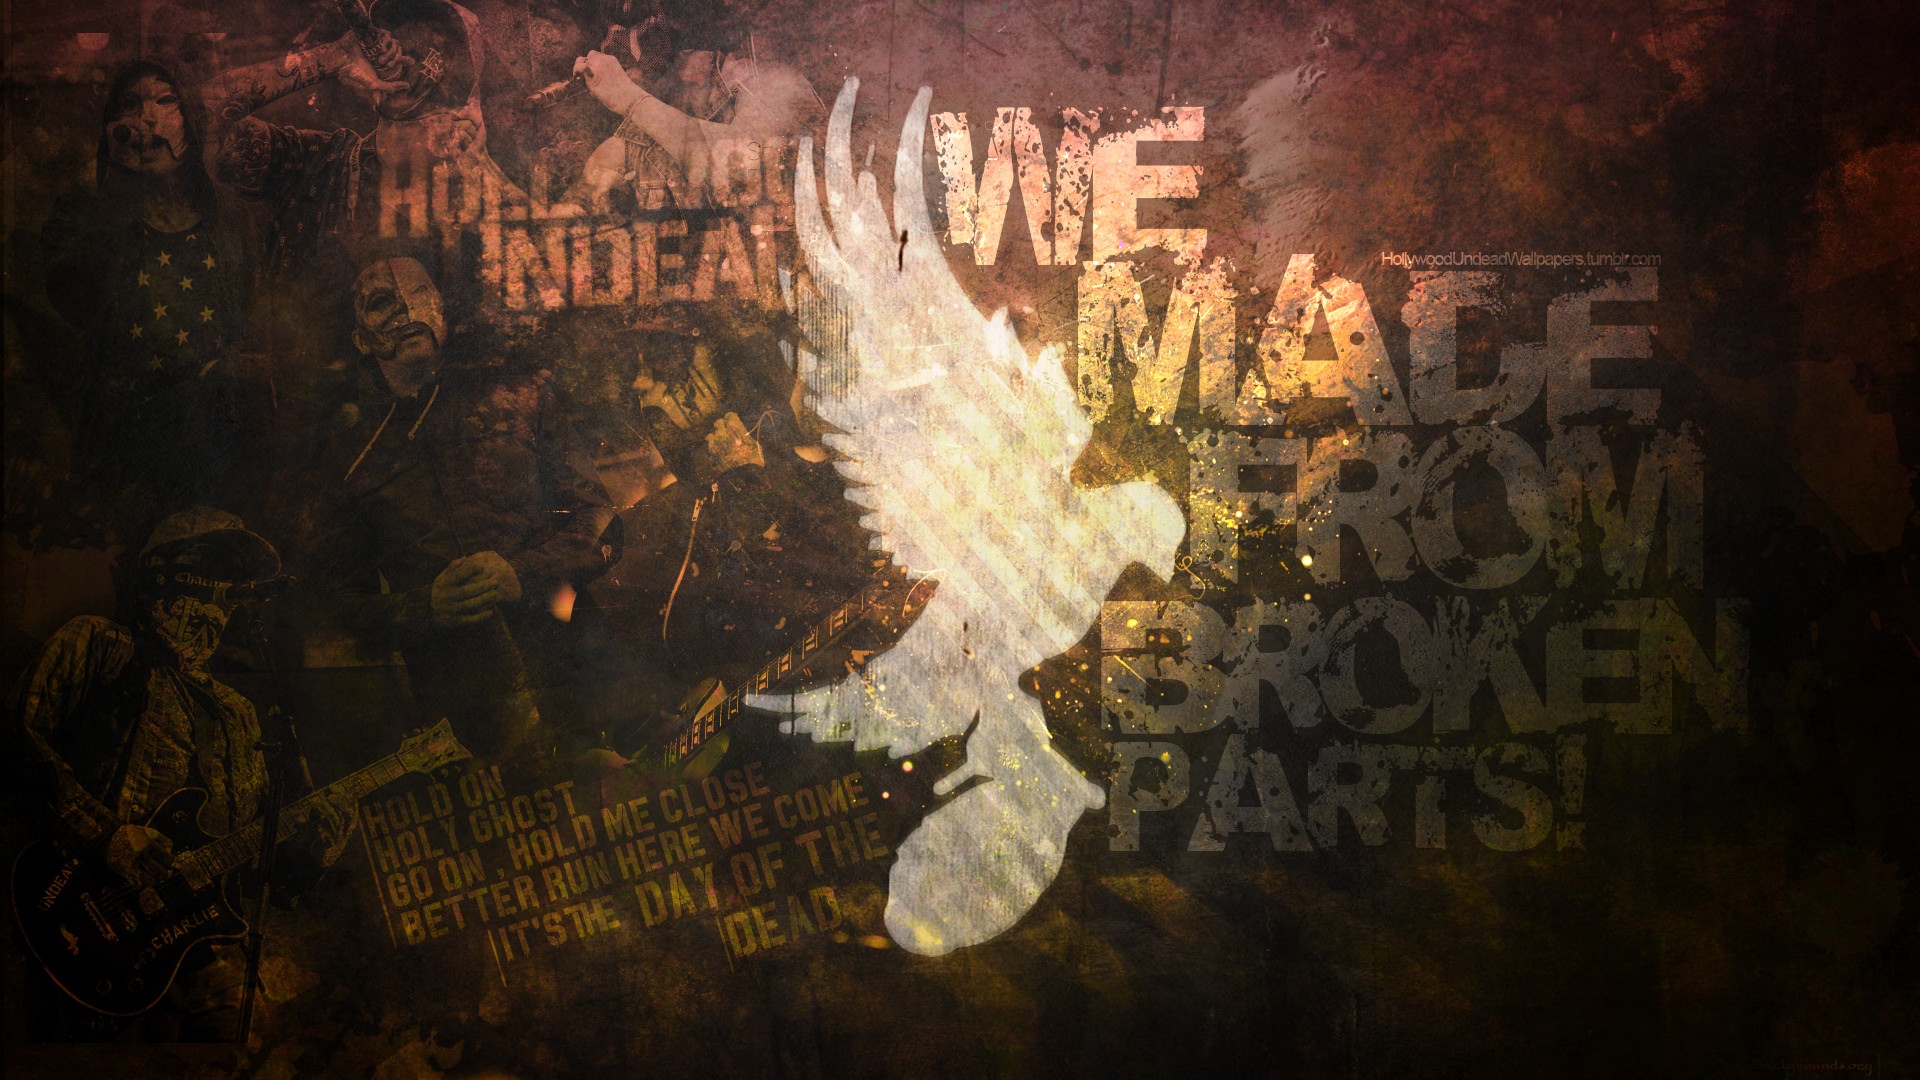 1920x1080 ... Hollywood Undead - Dove and Grenade Wallpaper by emirulug